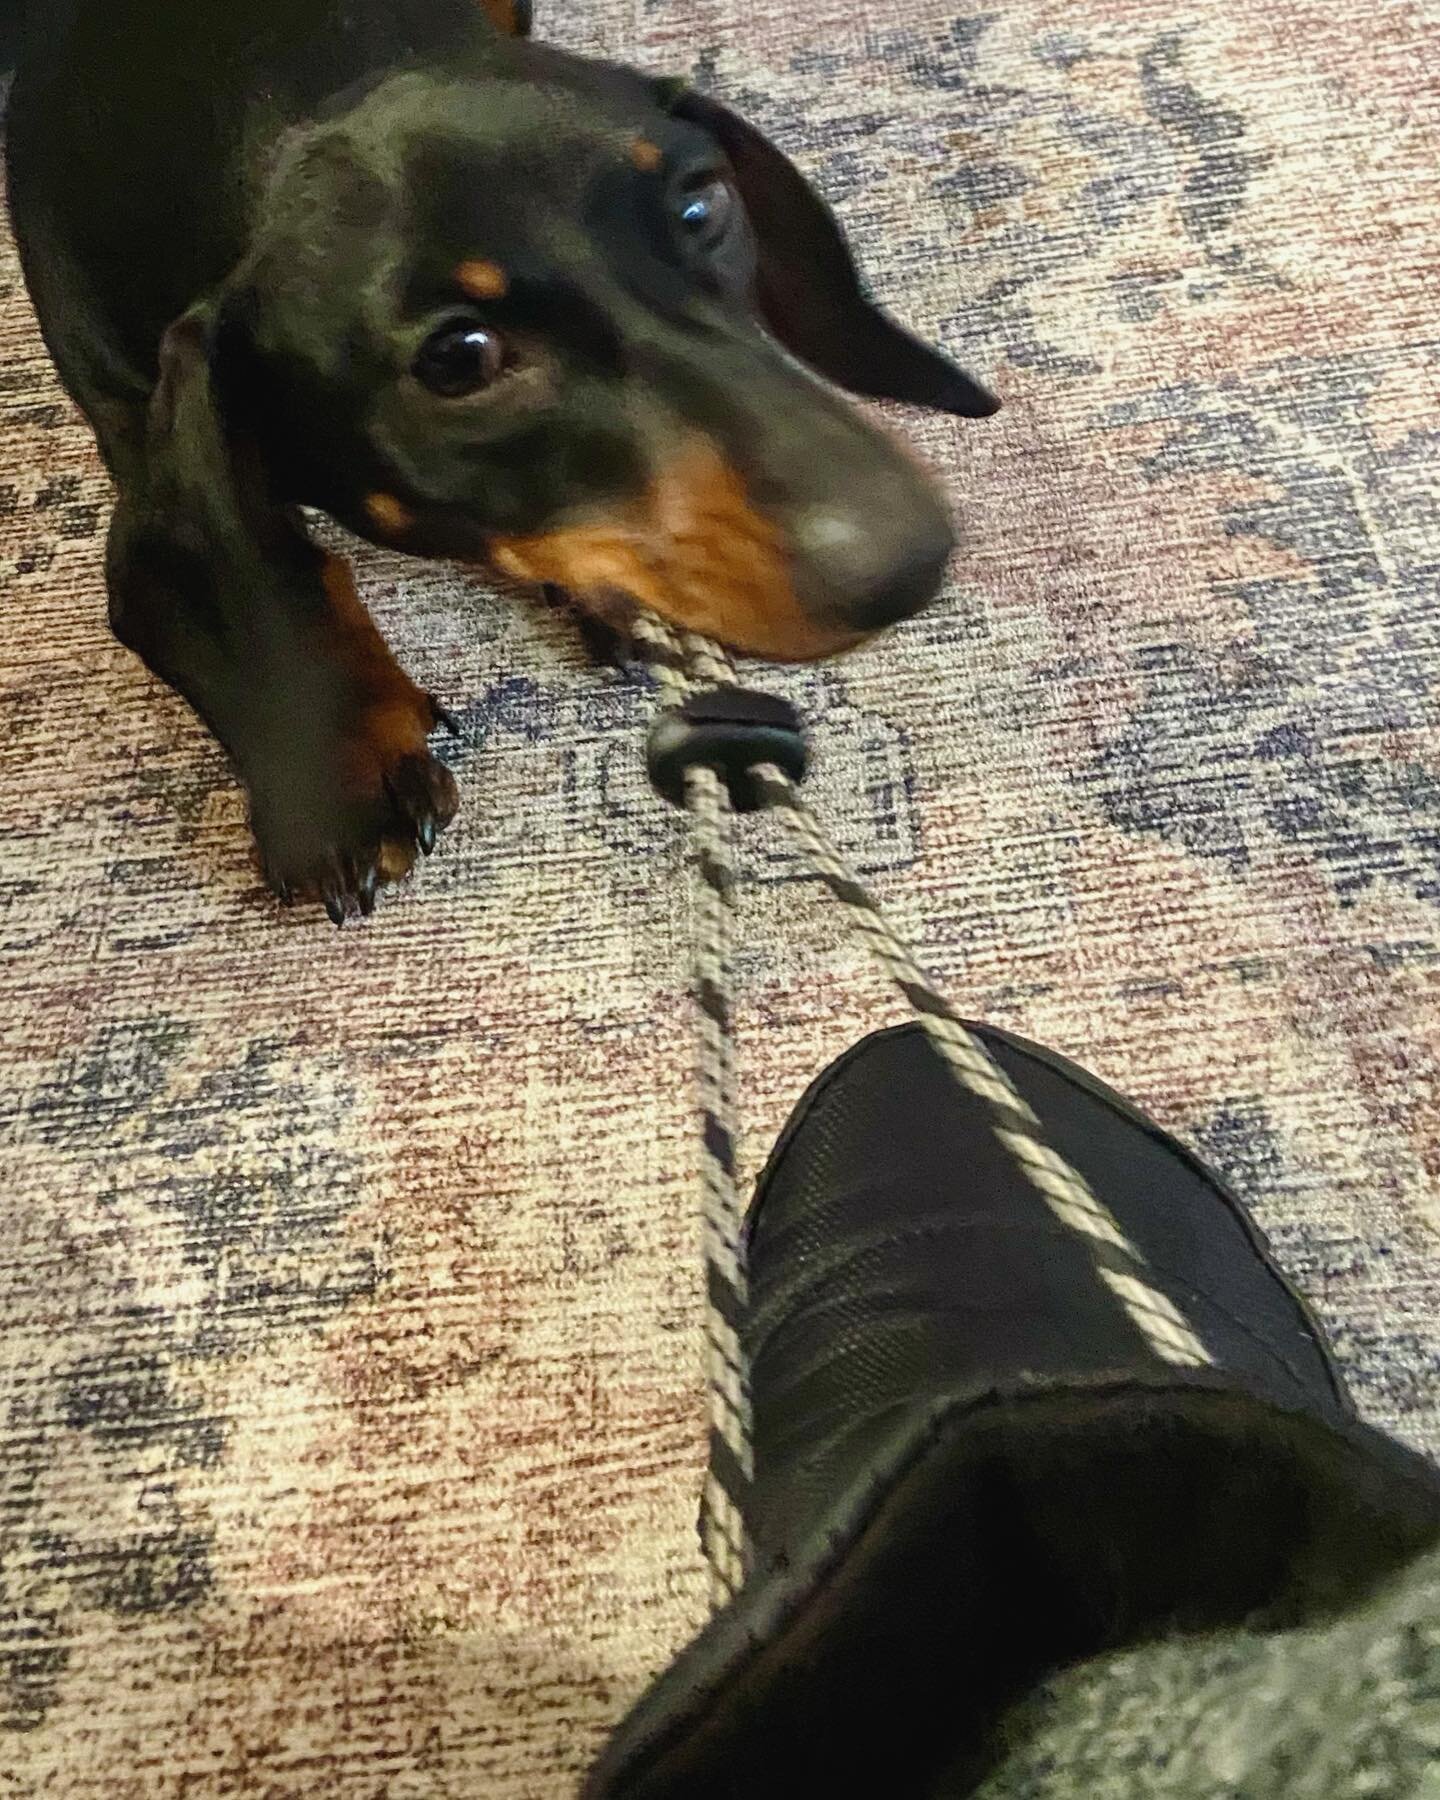 Puppy &ldquo;play date&rdquo; with Nori today.  She reminded me that there are some days we have to pick ourselves up by our boot straps and hold on tight.  #dogs #southenddogs